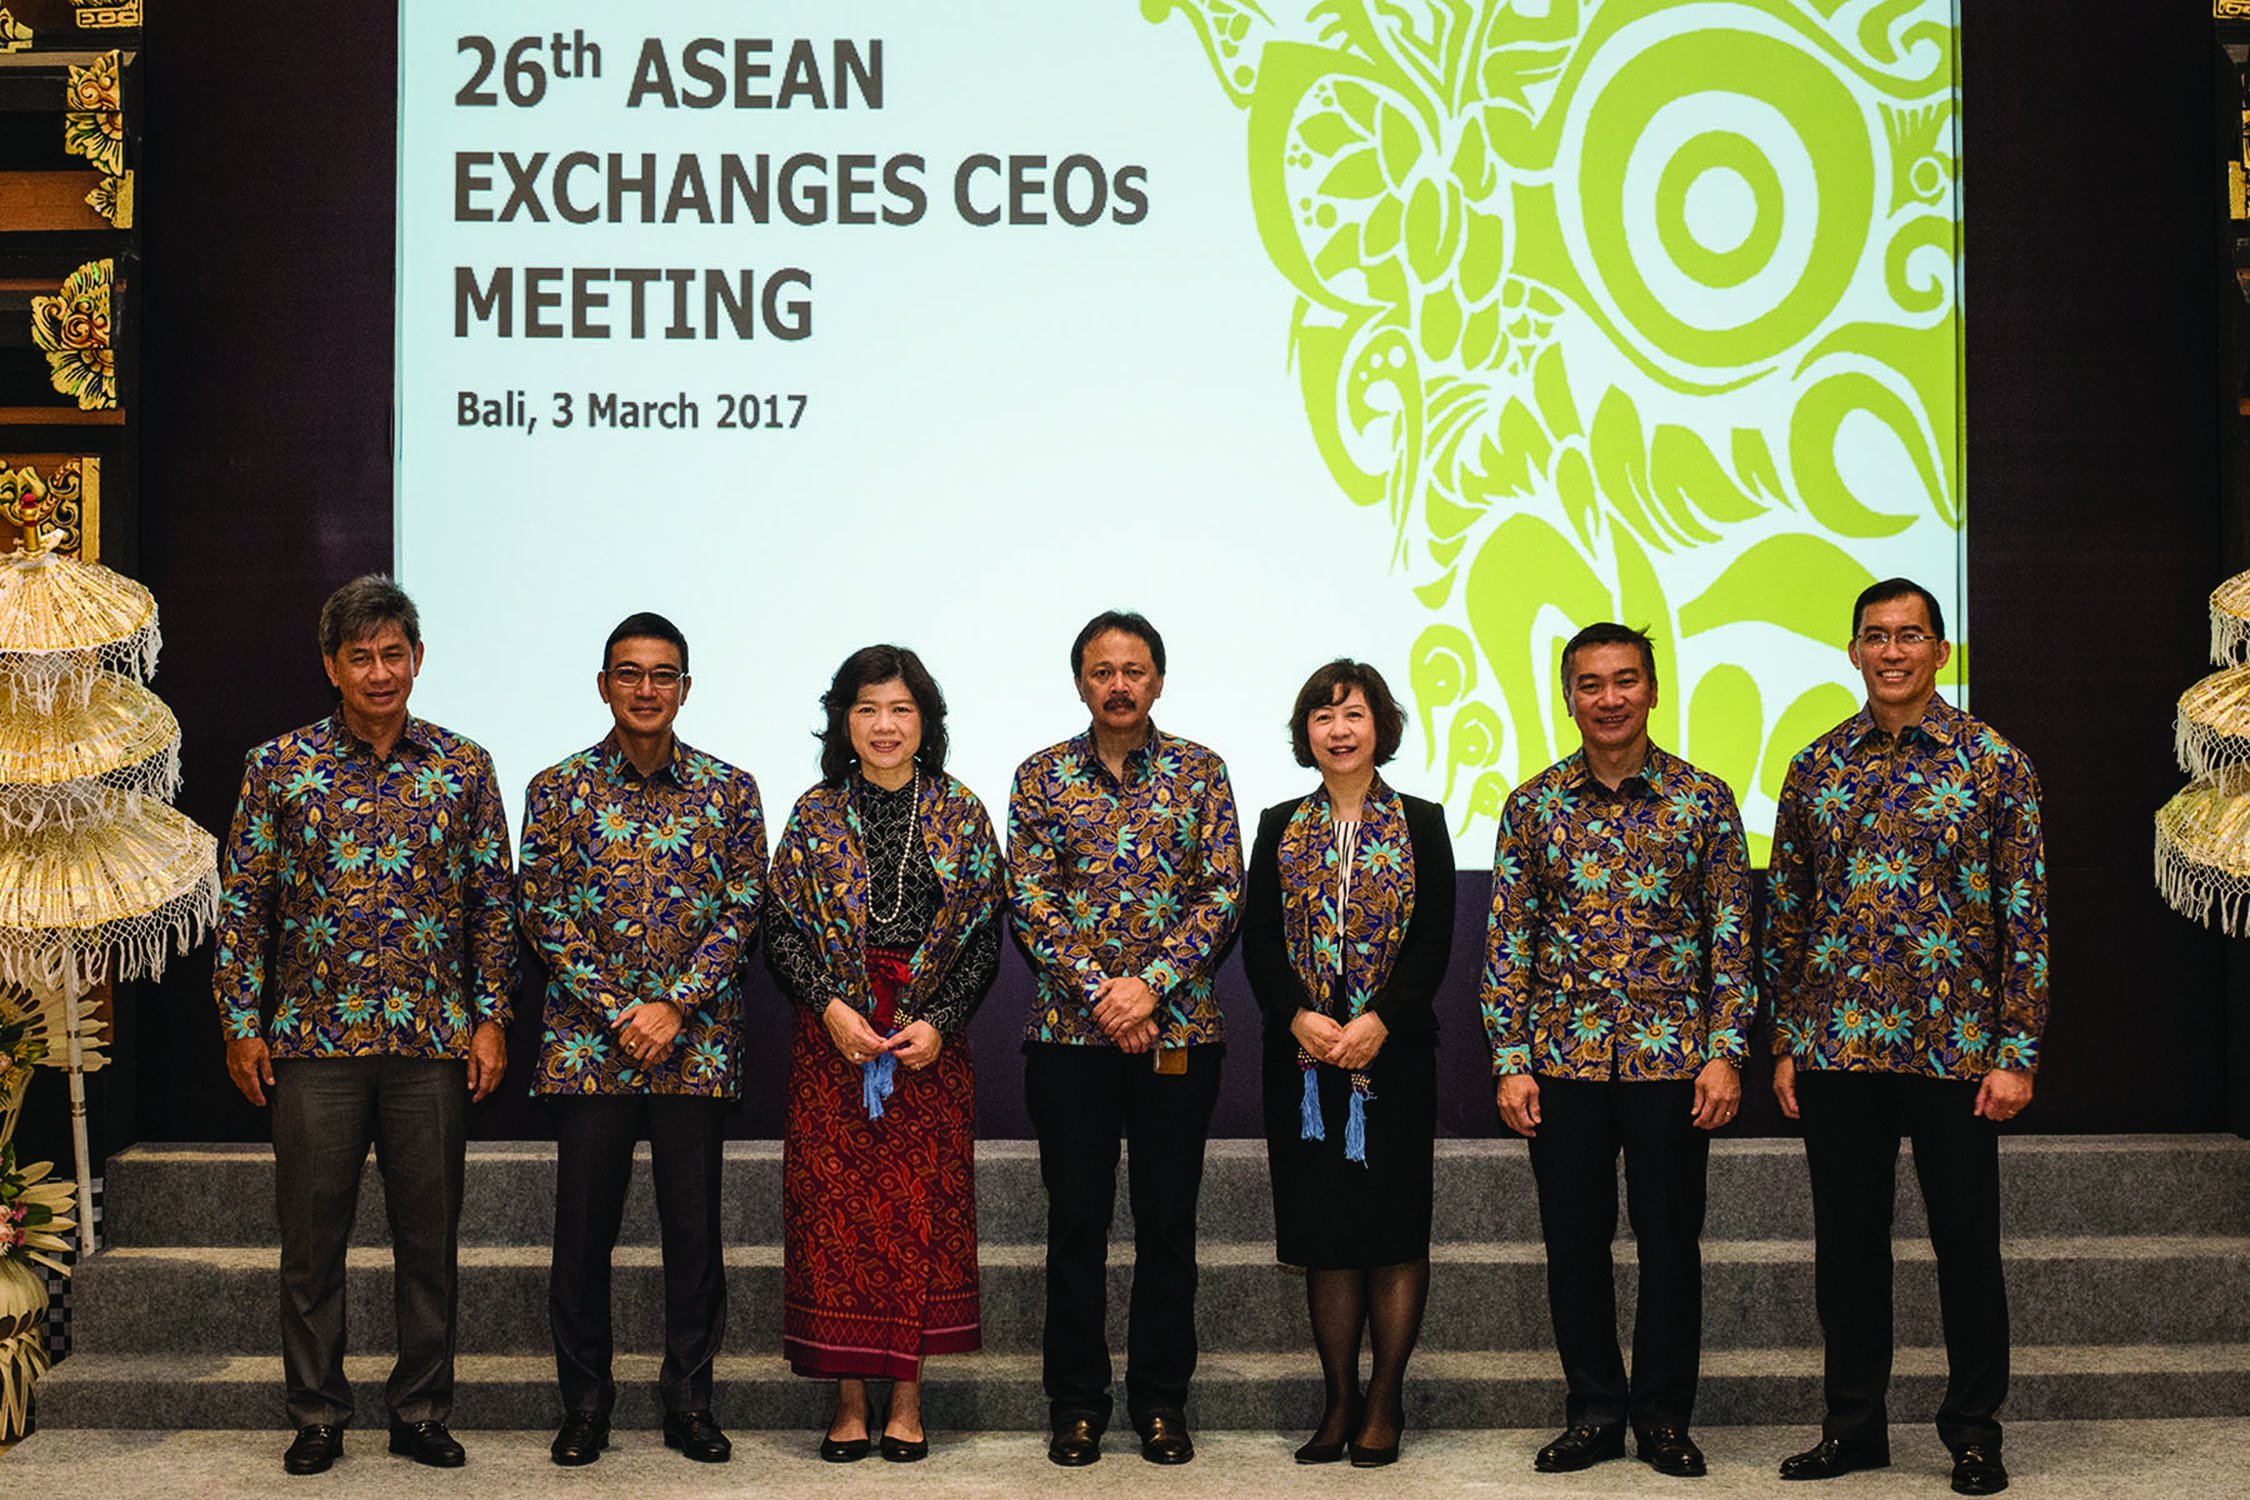 26th ASEAN Exchanges CEOs Meeting in Bali, Indonesia